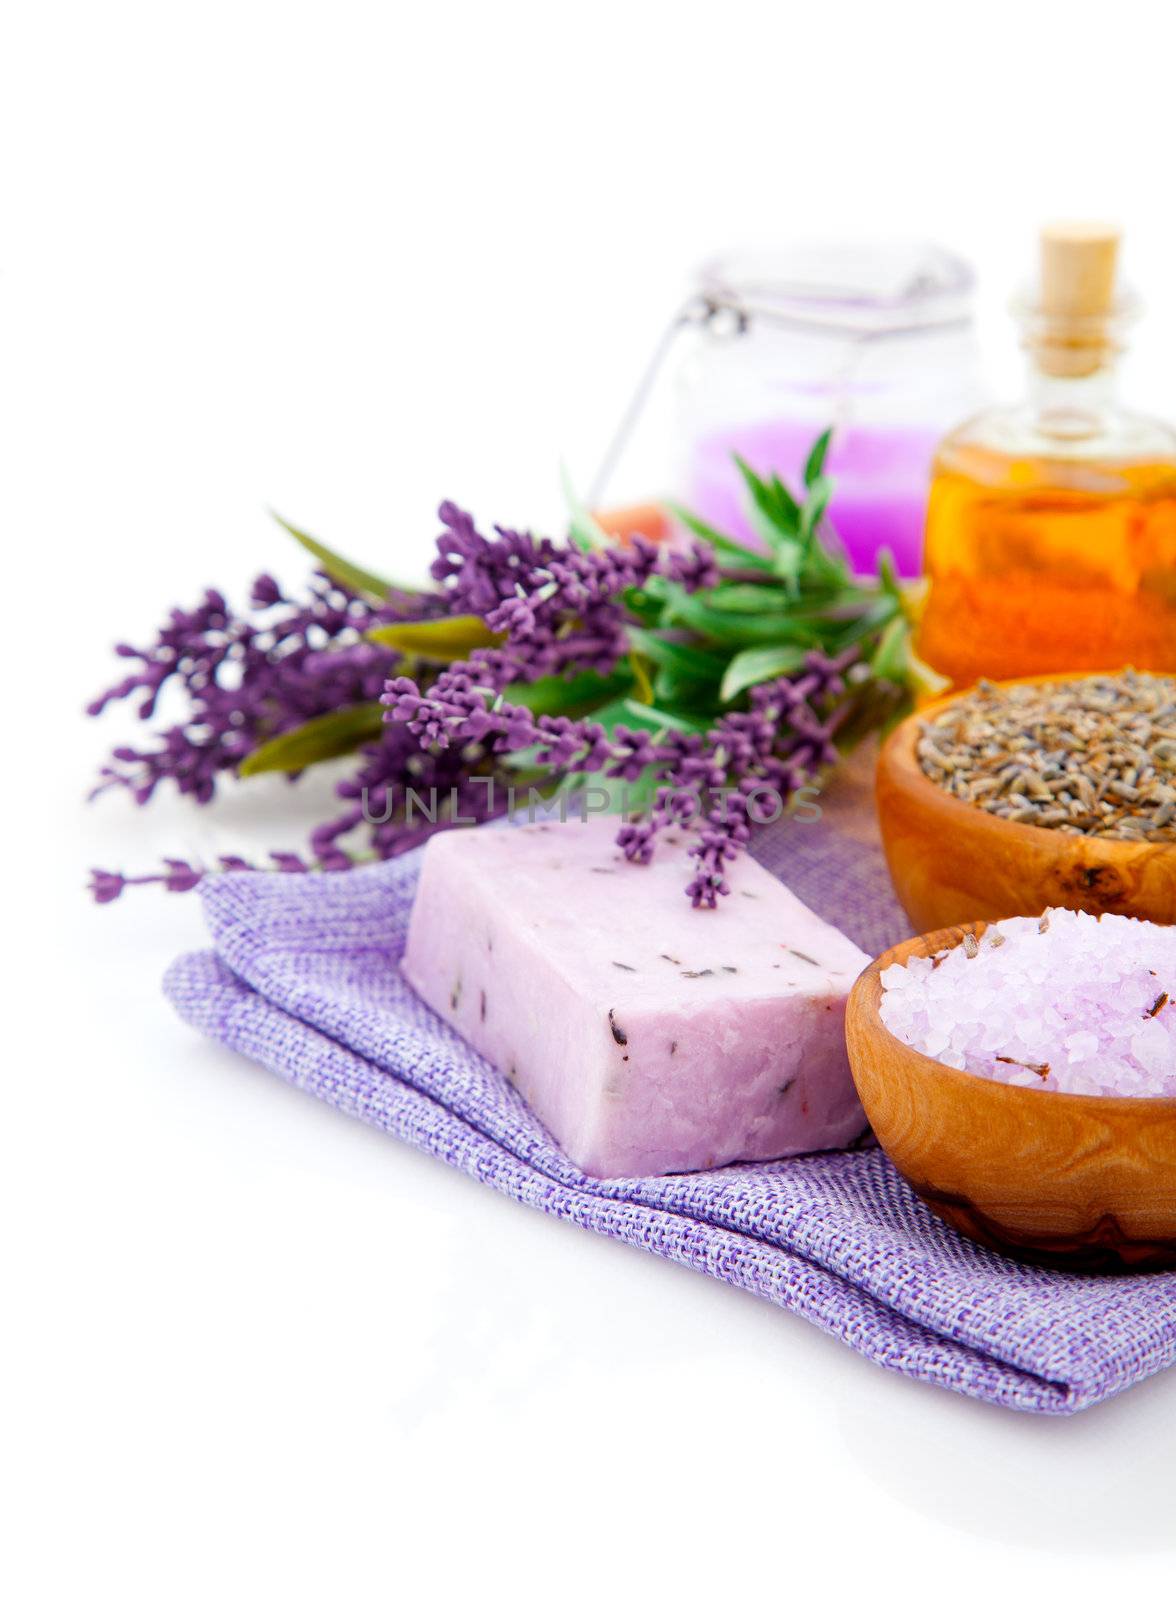 Spa treatment. Lavender bath salt, soap, oil and lavender flower, isolated on white background